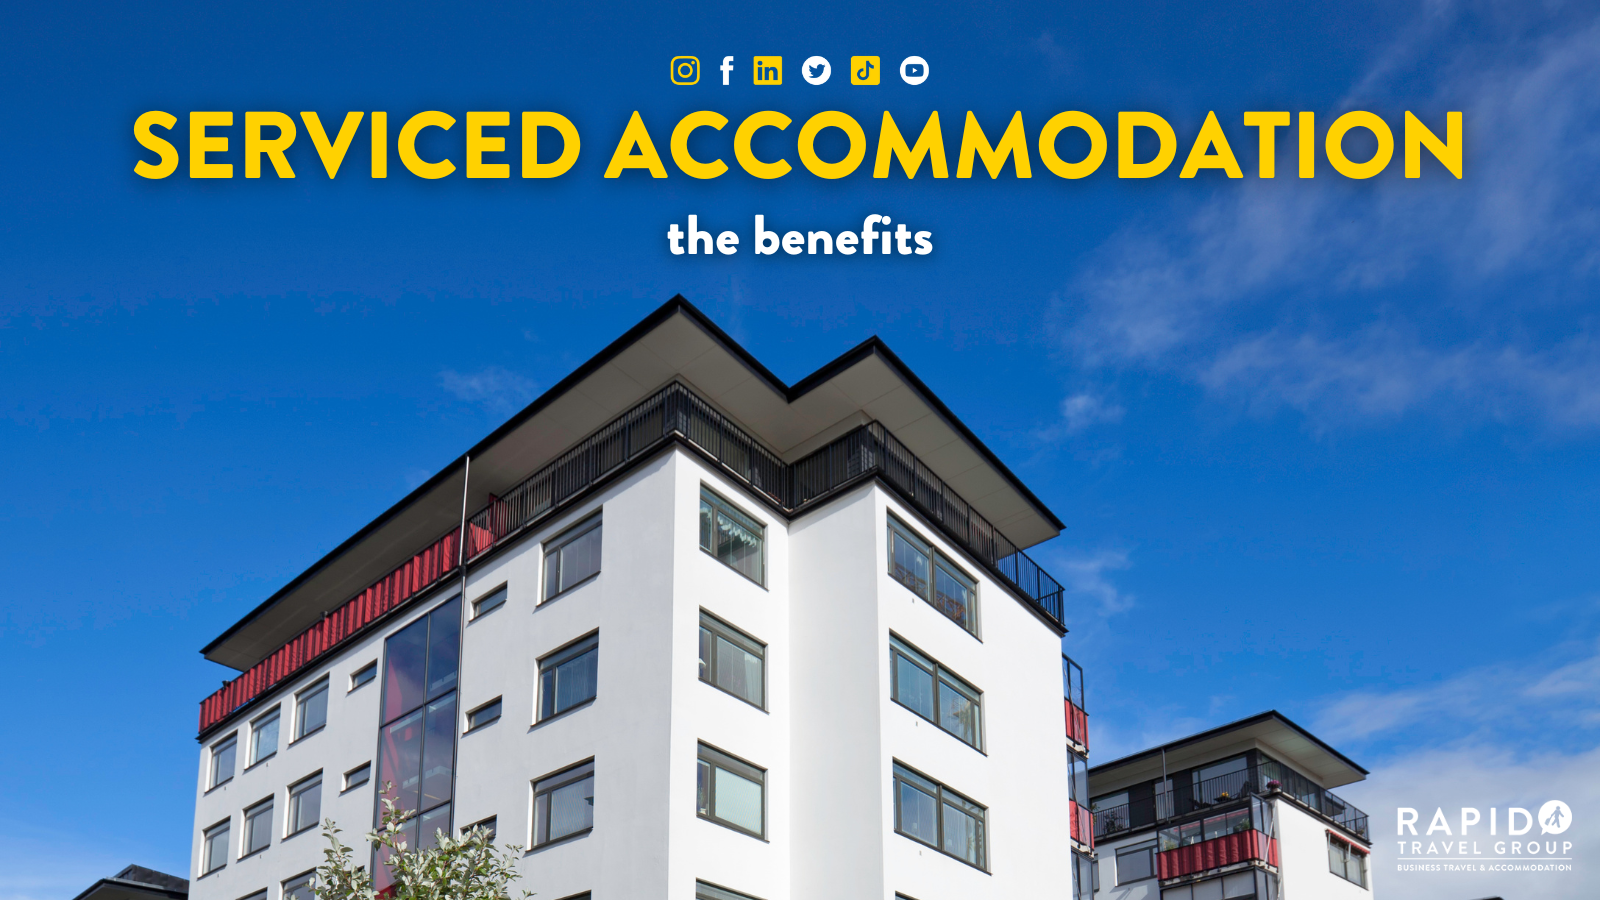 Serviced accommodation: the benefits